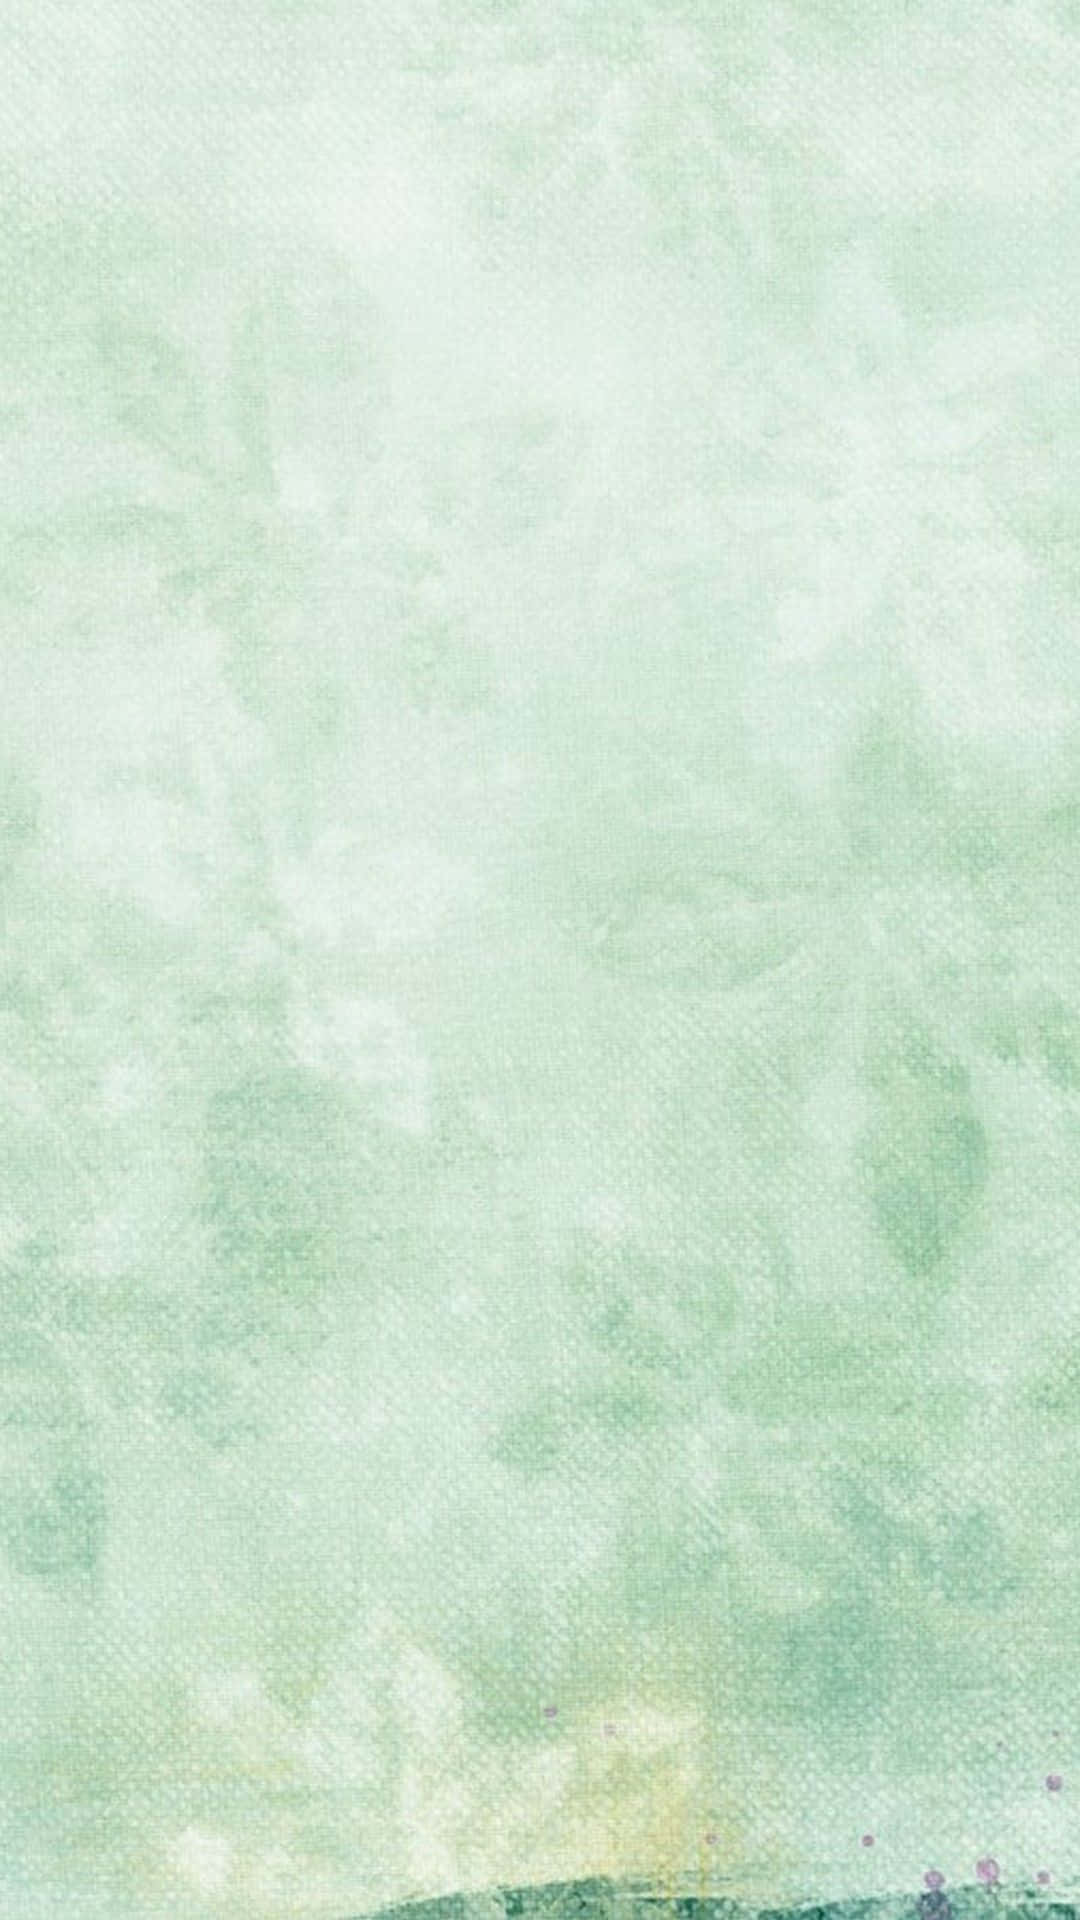 Freshen Up Your Home Decor with A Fresh Mint Green Aesthetic Wallpaper